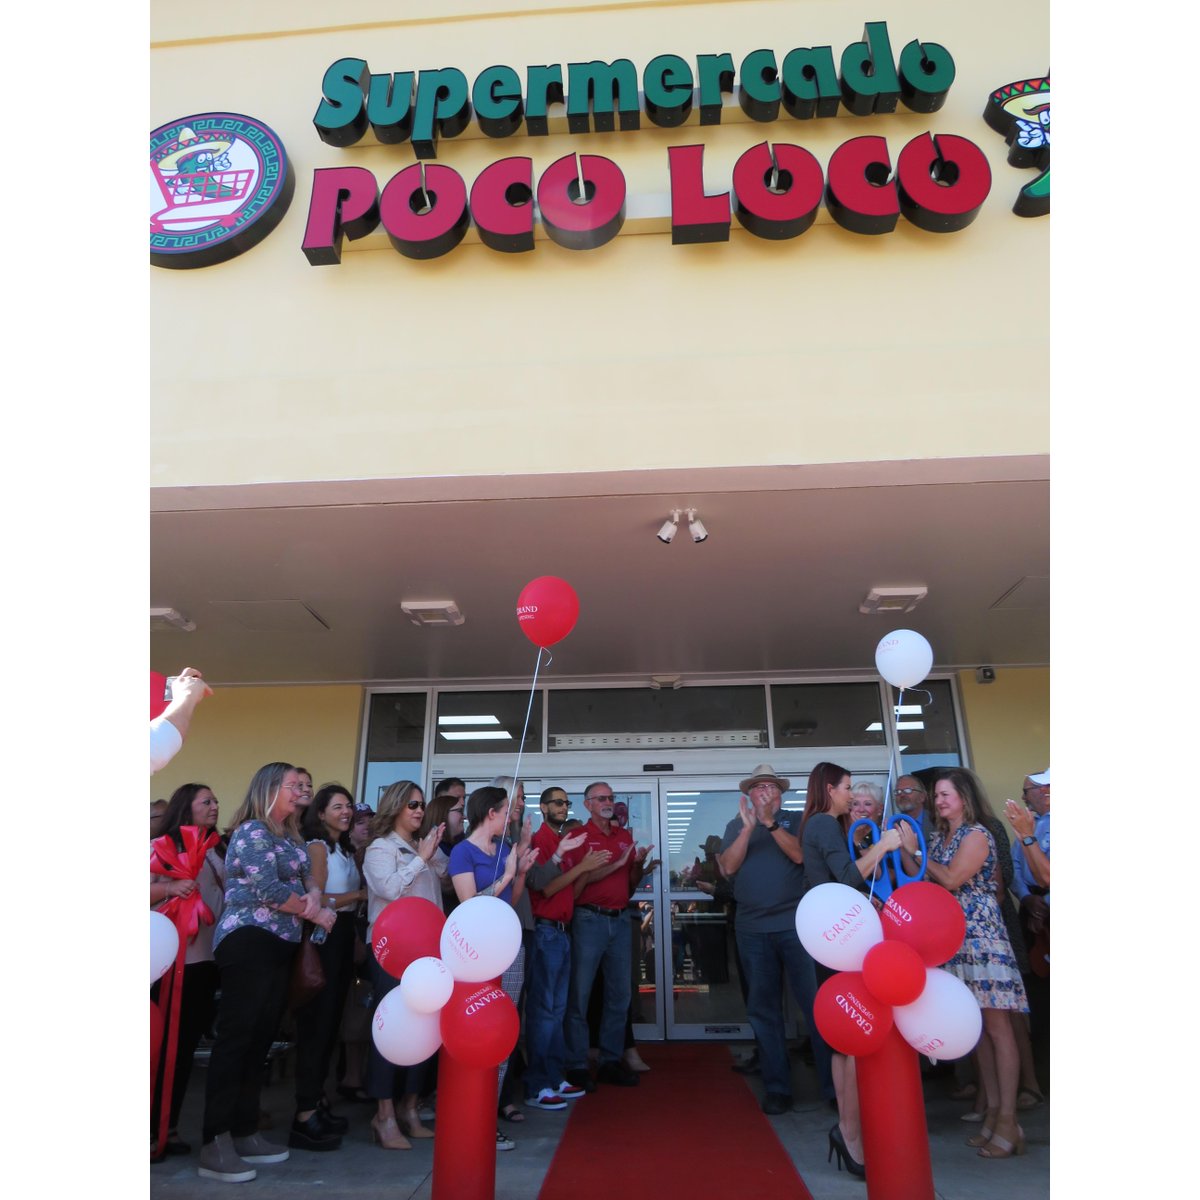 👉 Store opening! 🛒 Poco Loco opened a new store in San Marcos, TX! The address is: 900 Bugg Lane, Suite 124. It will be the 20th supermarket for Poco Loco. The headquarters is in Kyle.

#PocoLoco #Grocery #Texas #StoreOpenings #SupermarketNews